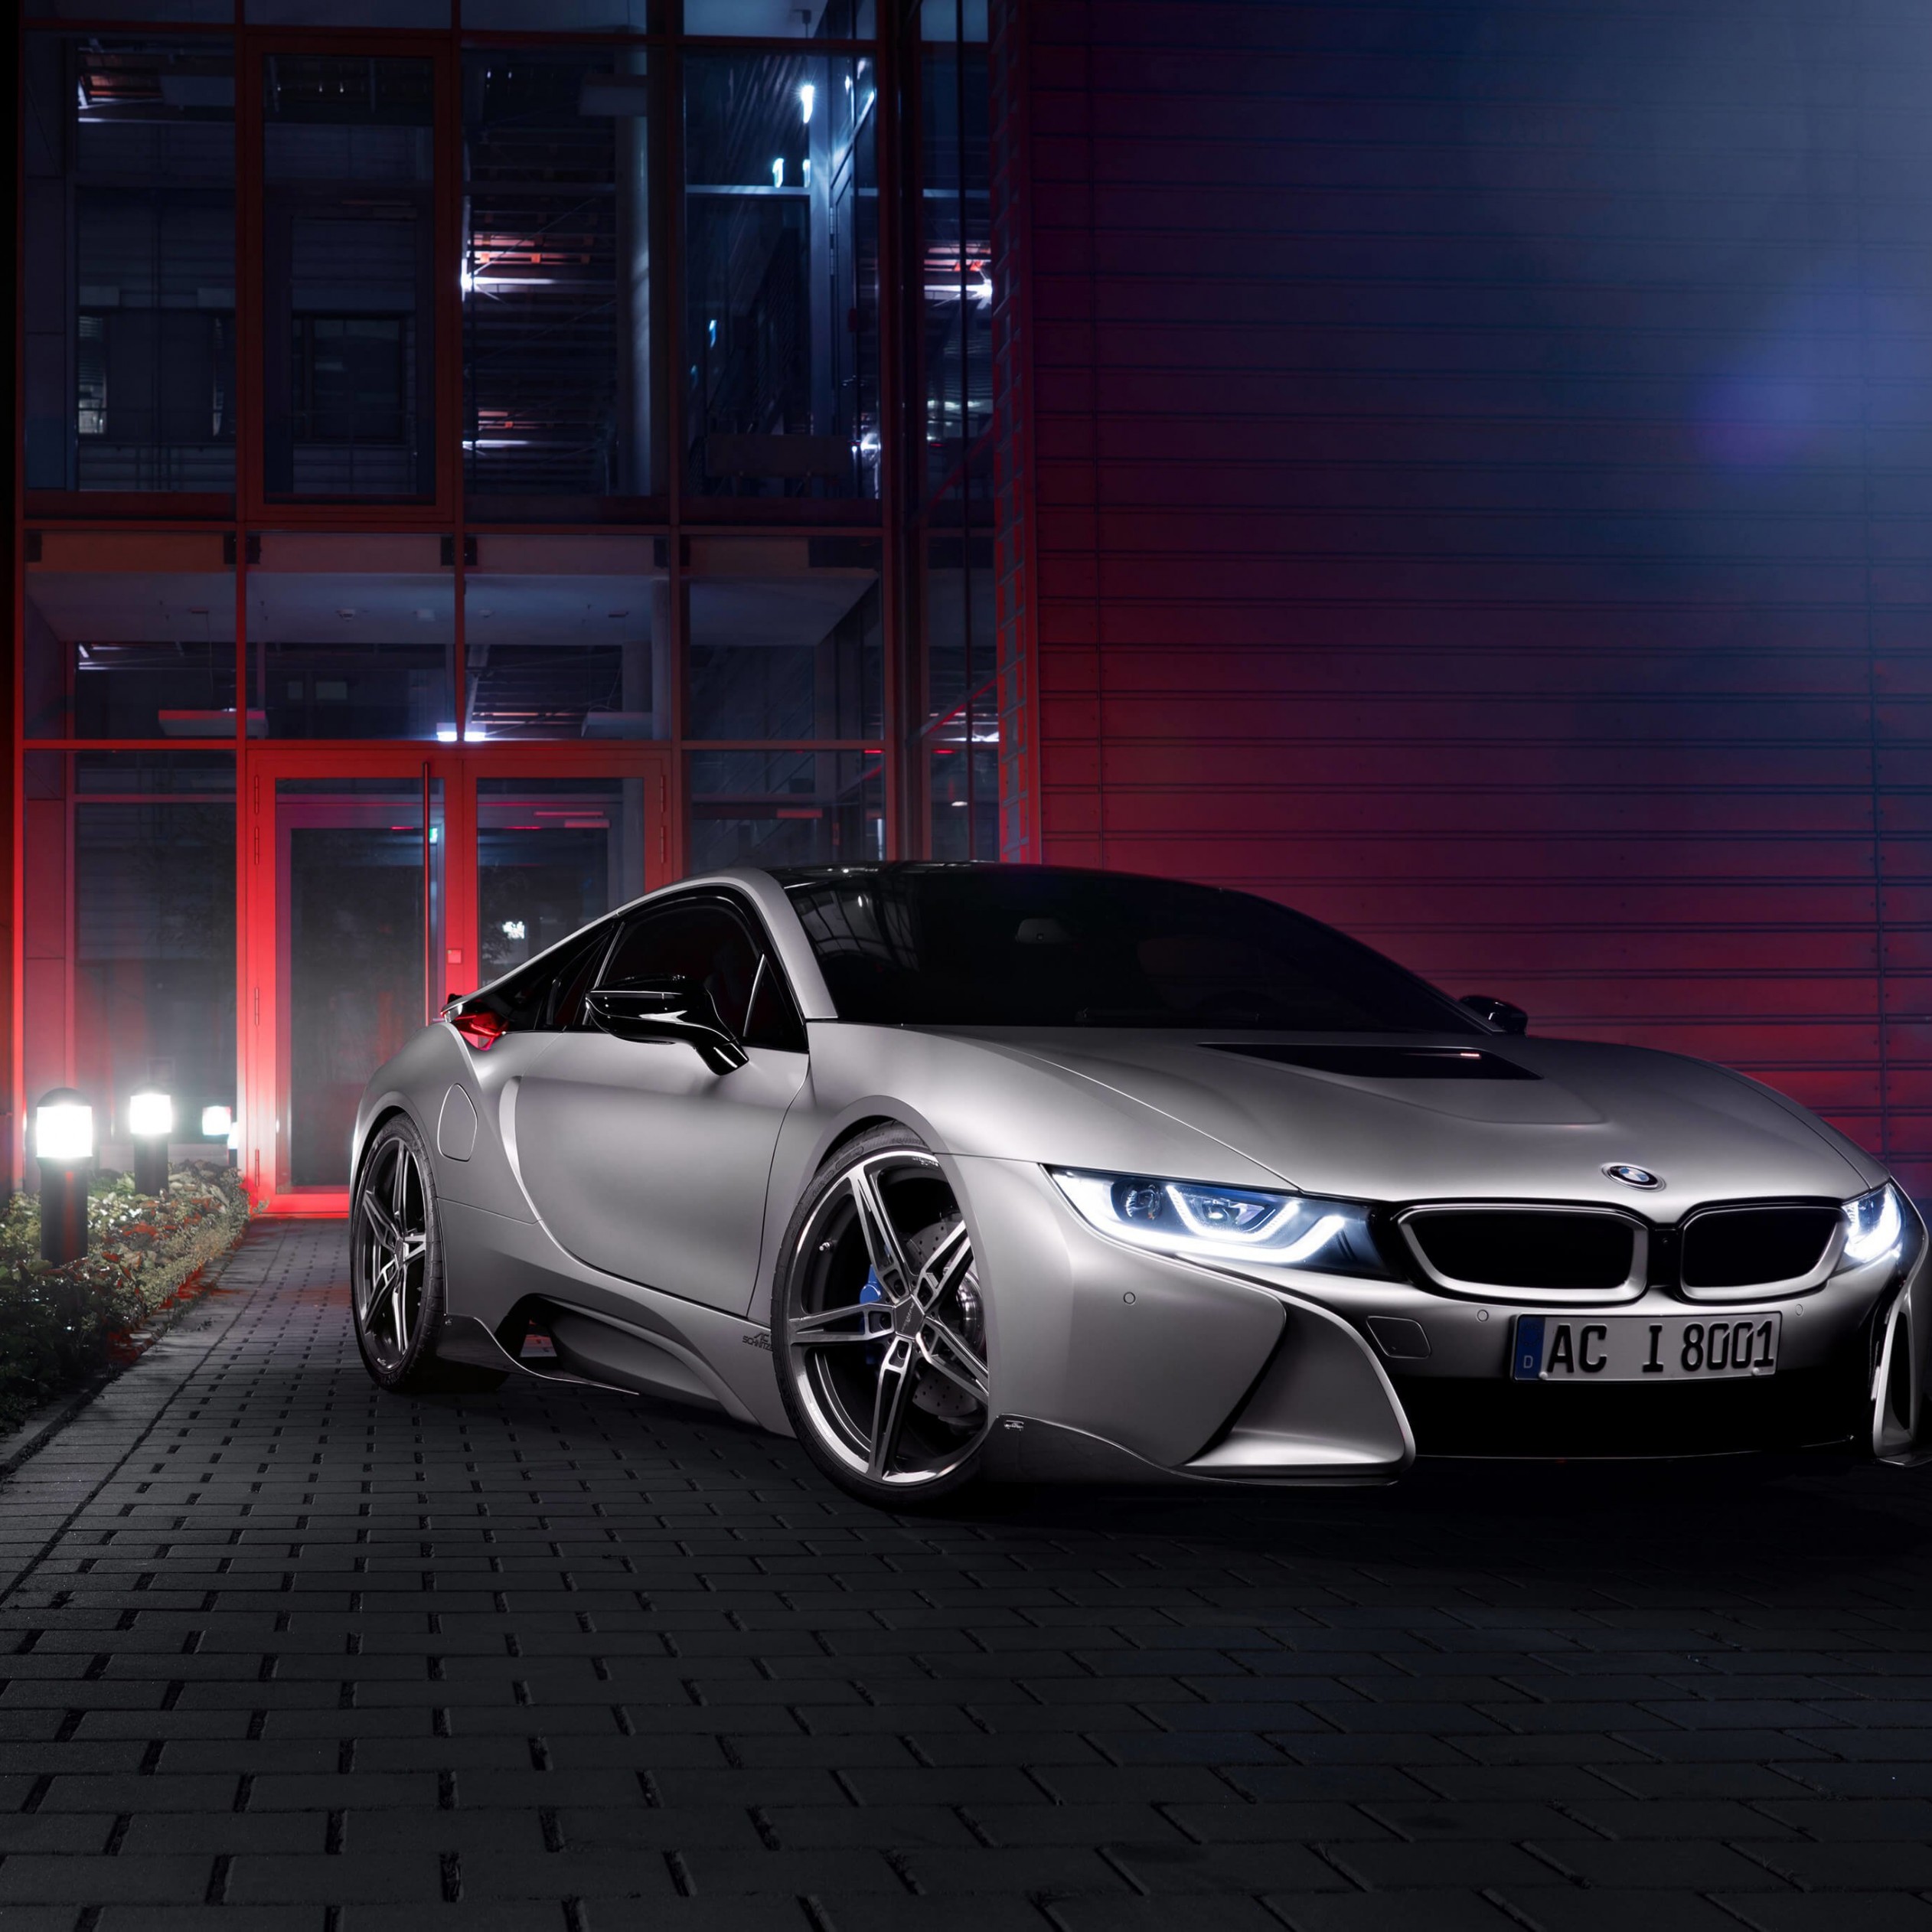 BMW i8 designed by AC Schnitzer Wallpaper for Apple iPad Air